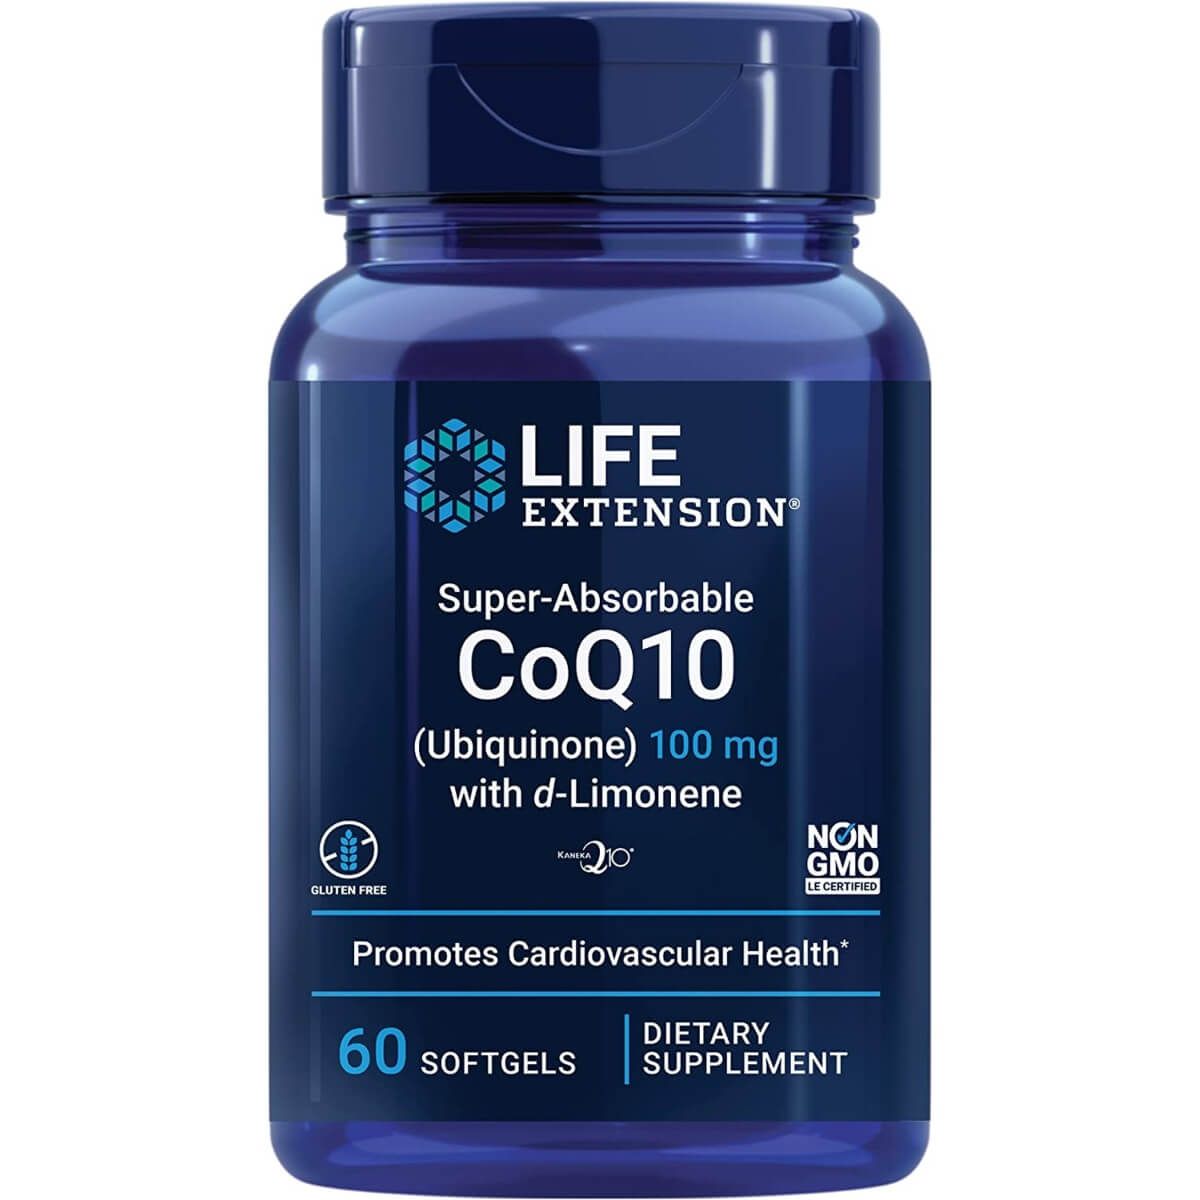 Photos - Vitamins & Minerals Life Extension Super-Absorbable CoQ10  with d-Limonene 100 mg (Ubiquinone)